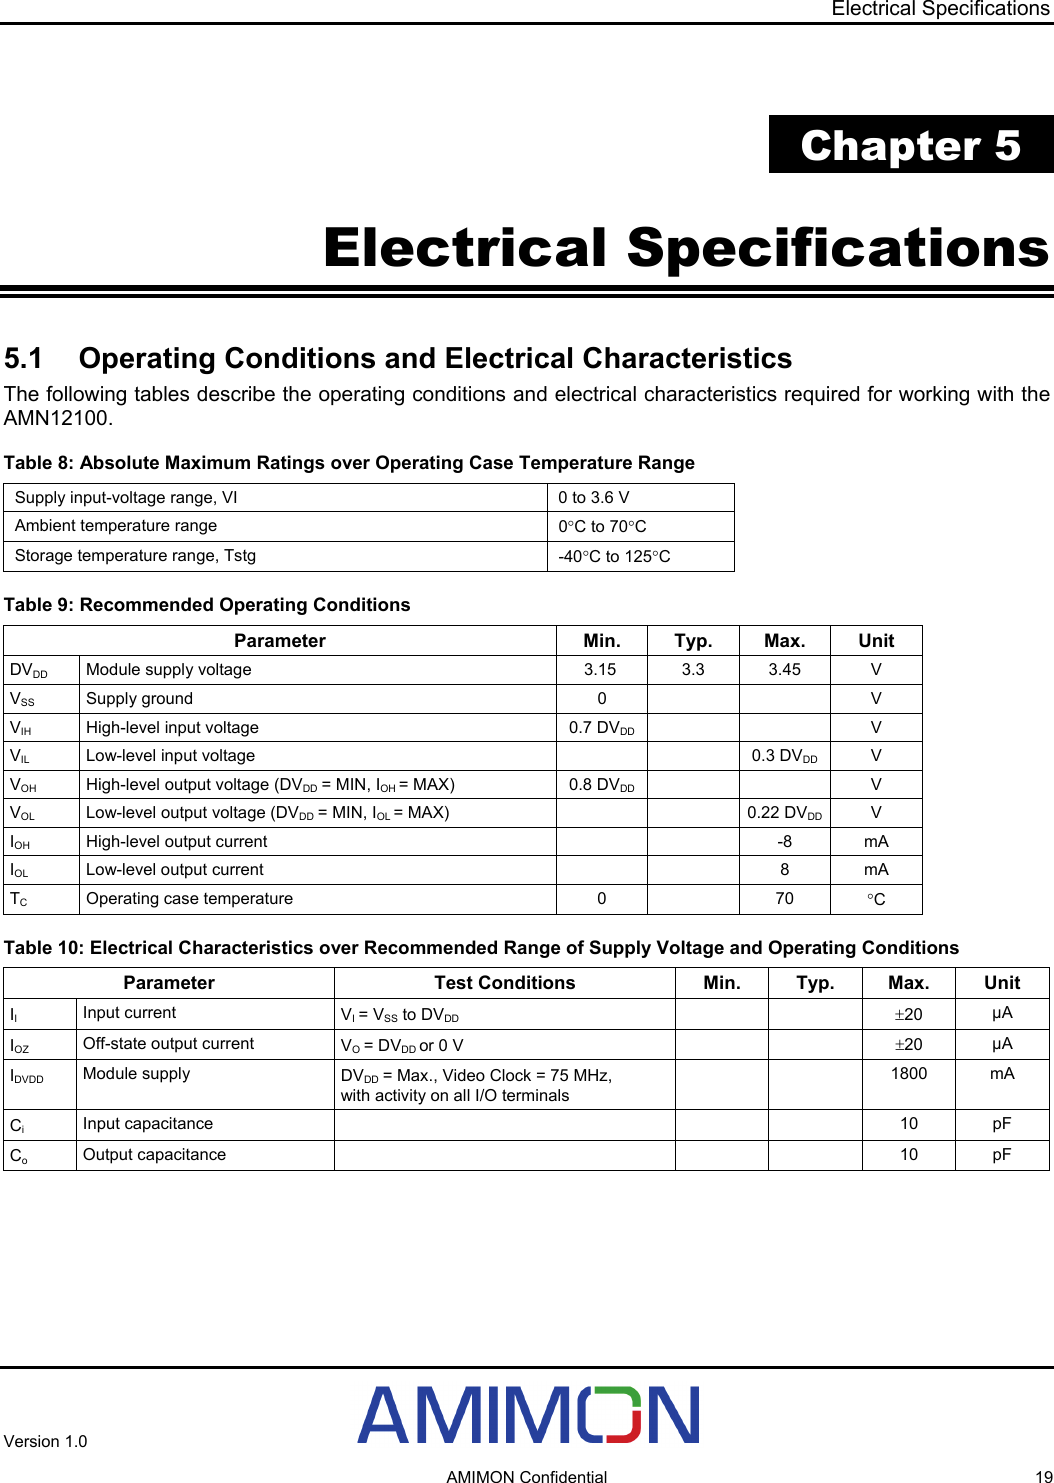 Electrical Specifications  Chapter 5 Electrical Specifications 5.1  Operating Conditions and Electrical Characteristics The following tables describe the operating conditions and electrical characteristics required for working with the AMN12100. Table 8: Absolute Maximum Ratings over Operating Case Temperature Range  Supply input-voltage range, VI  0 to 3.6 V Ambient temperature range  0°C to 70°C Storage temperature range, Tstg  -40°C to 125°C Table 9: Recommended Operating Conditions Parameter Min. Typ. Max. Unit DVDD Module supply voltage    3.15  3.3  3.45  V VSS Supply ground  0      V VIH High-level input voltage  0.7 DVDD   V VIL Low-level input voltage      0.3 DVDD V VOH High-level output voltage (DVDD = MIN, IOH = MAX)  0.8 DVDD   V VOL Low-level output voltage (DVDD = MIN, IOL = MAX)      0.22 DVDD V IOH High-level output current      -8  mA IOL Low-level output current      8  mA TCOperating case temperature  0    70  °C Table 10: Electrical Characteristics over Recommended Range of Supply Voltage and Operating Conditions Parameter Test Conditions Min. Typ. Max. Unit IIInput current  VI = VSS to DVDD   ±20  μA IOZ Off-state output current  VO = DVDD or 0 V    ±20  μA IDVDD Module supply   DVDD = Max., Video Clock = 75 MHz, with activity on all I/O terminals   1800 mA CiInput capacitance     10 pF CoOutput capacitance     10 pF  Version 1.0     AMIMON Confidential  19 